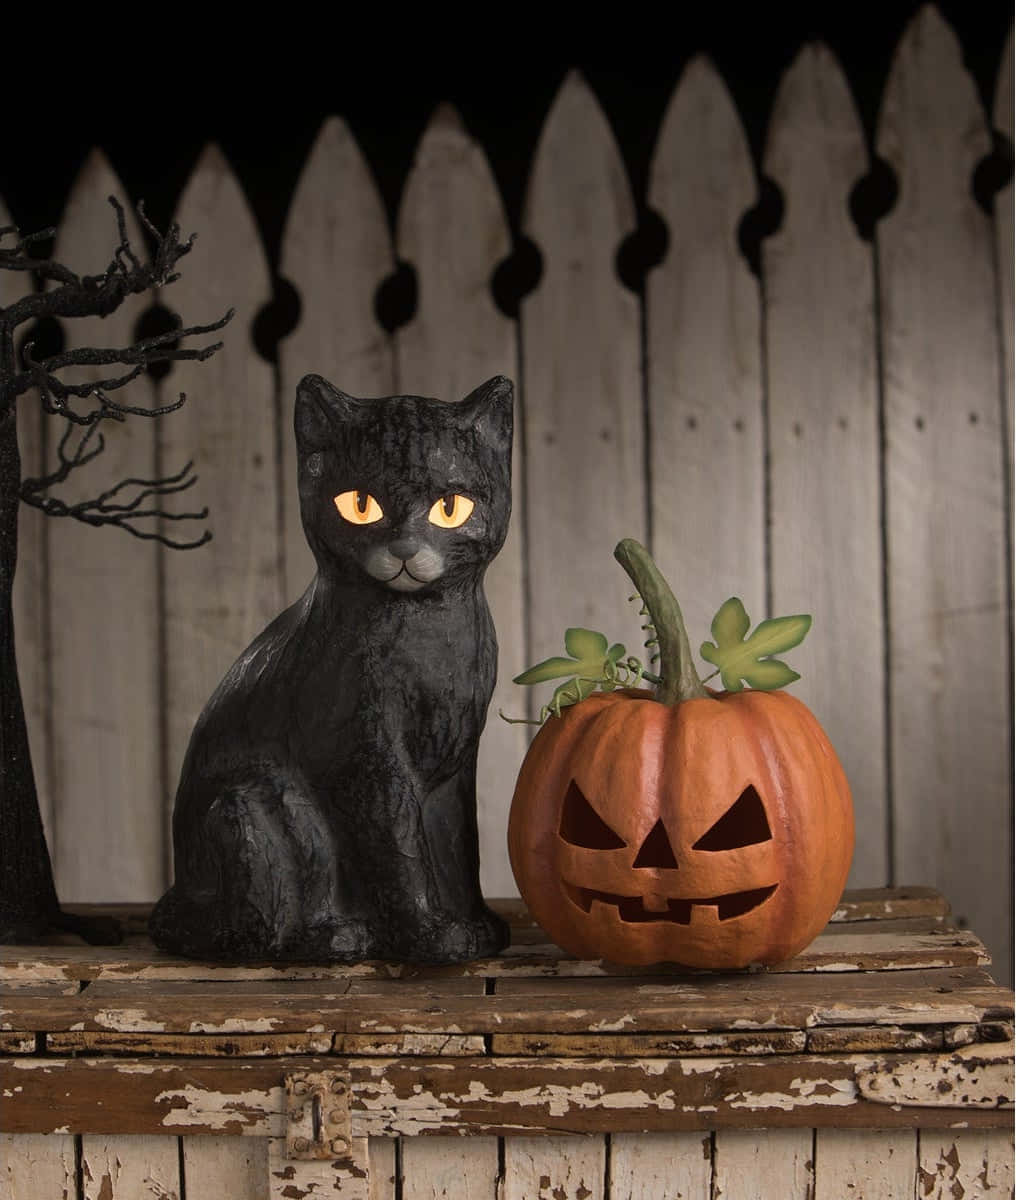 A spooky Halloween cat ready to bewitch. Wallpaper